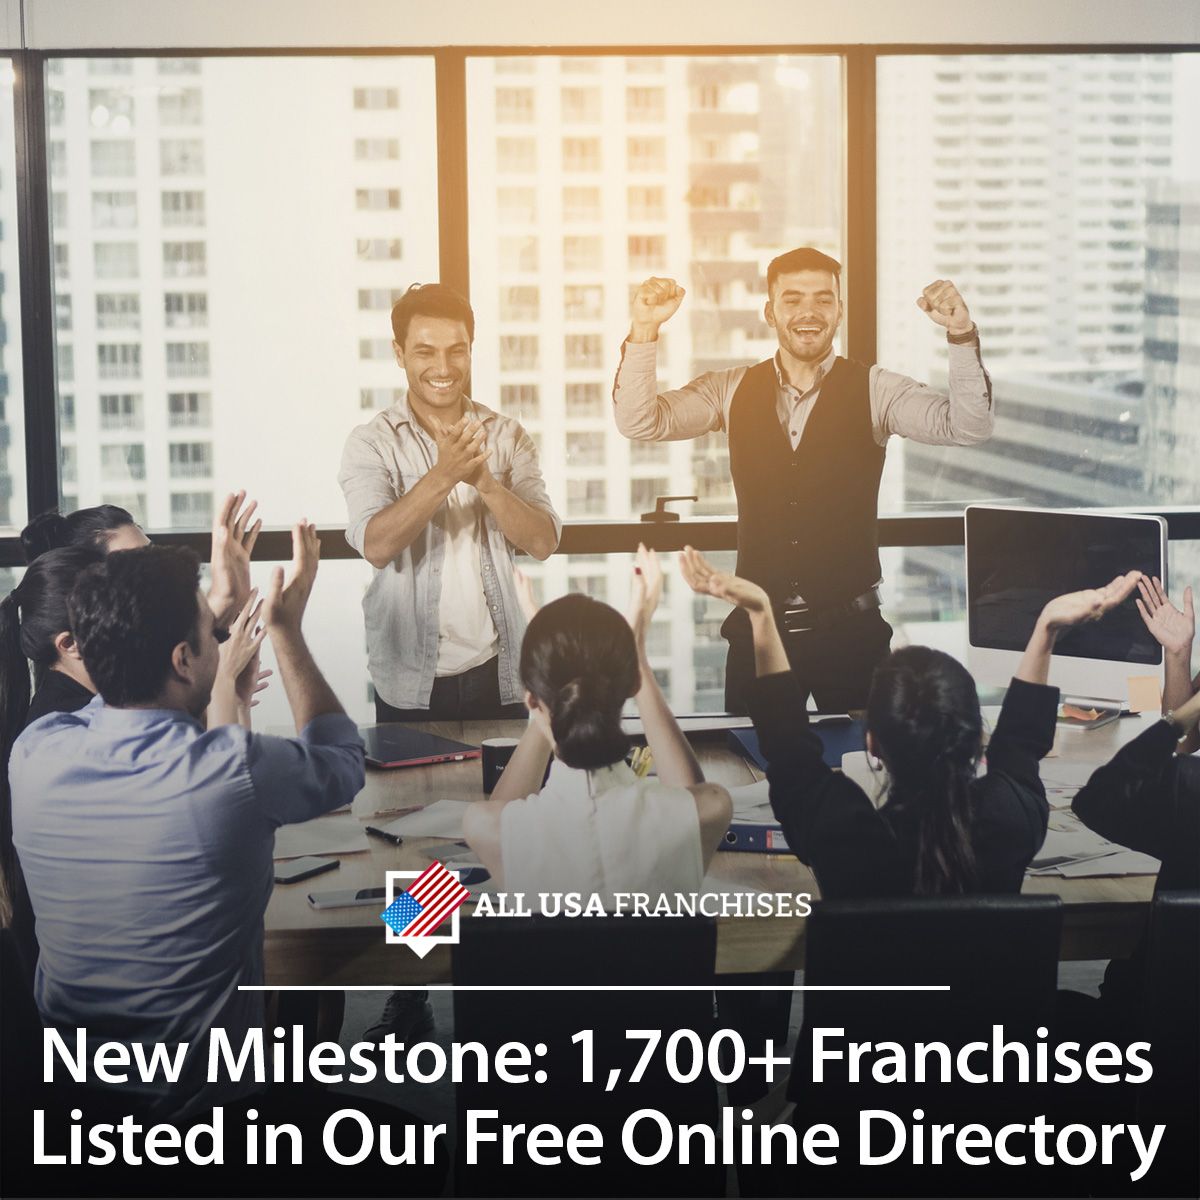 New Milestone: 1,700+ Franchises Listed in Our Free Online Directory